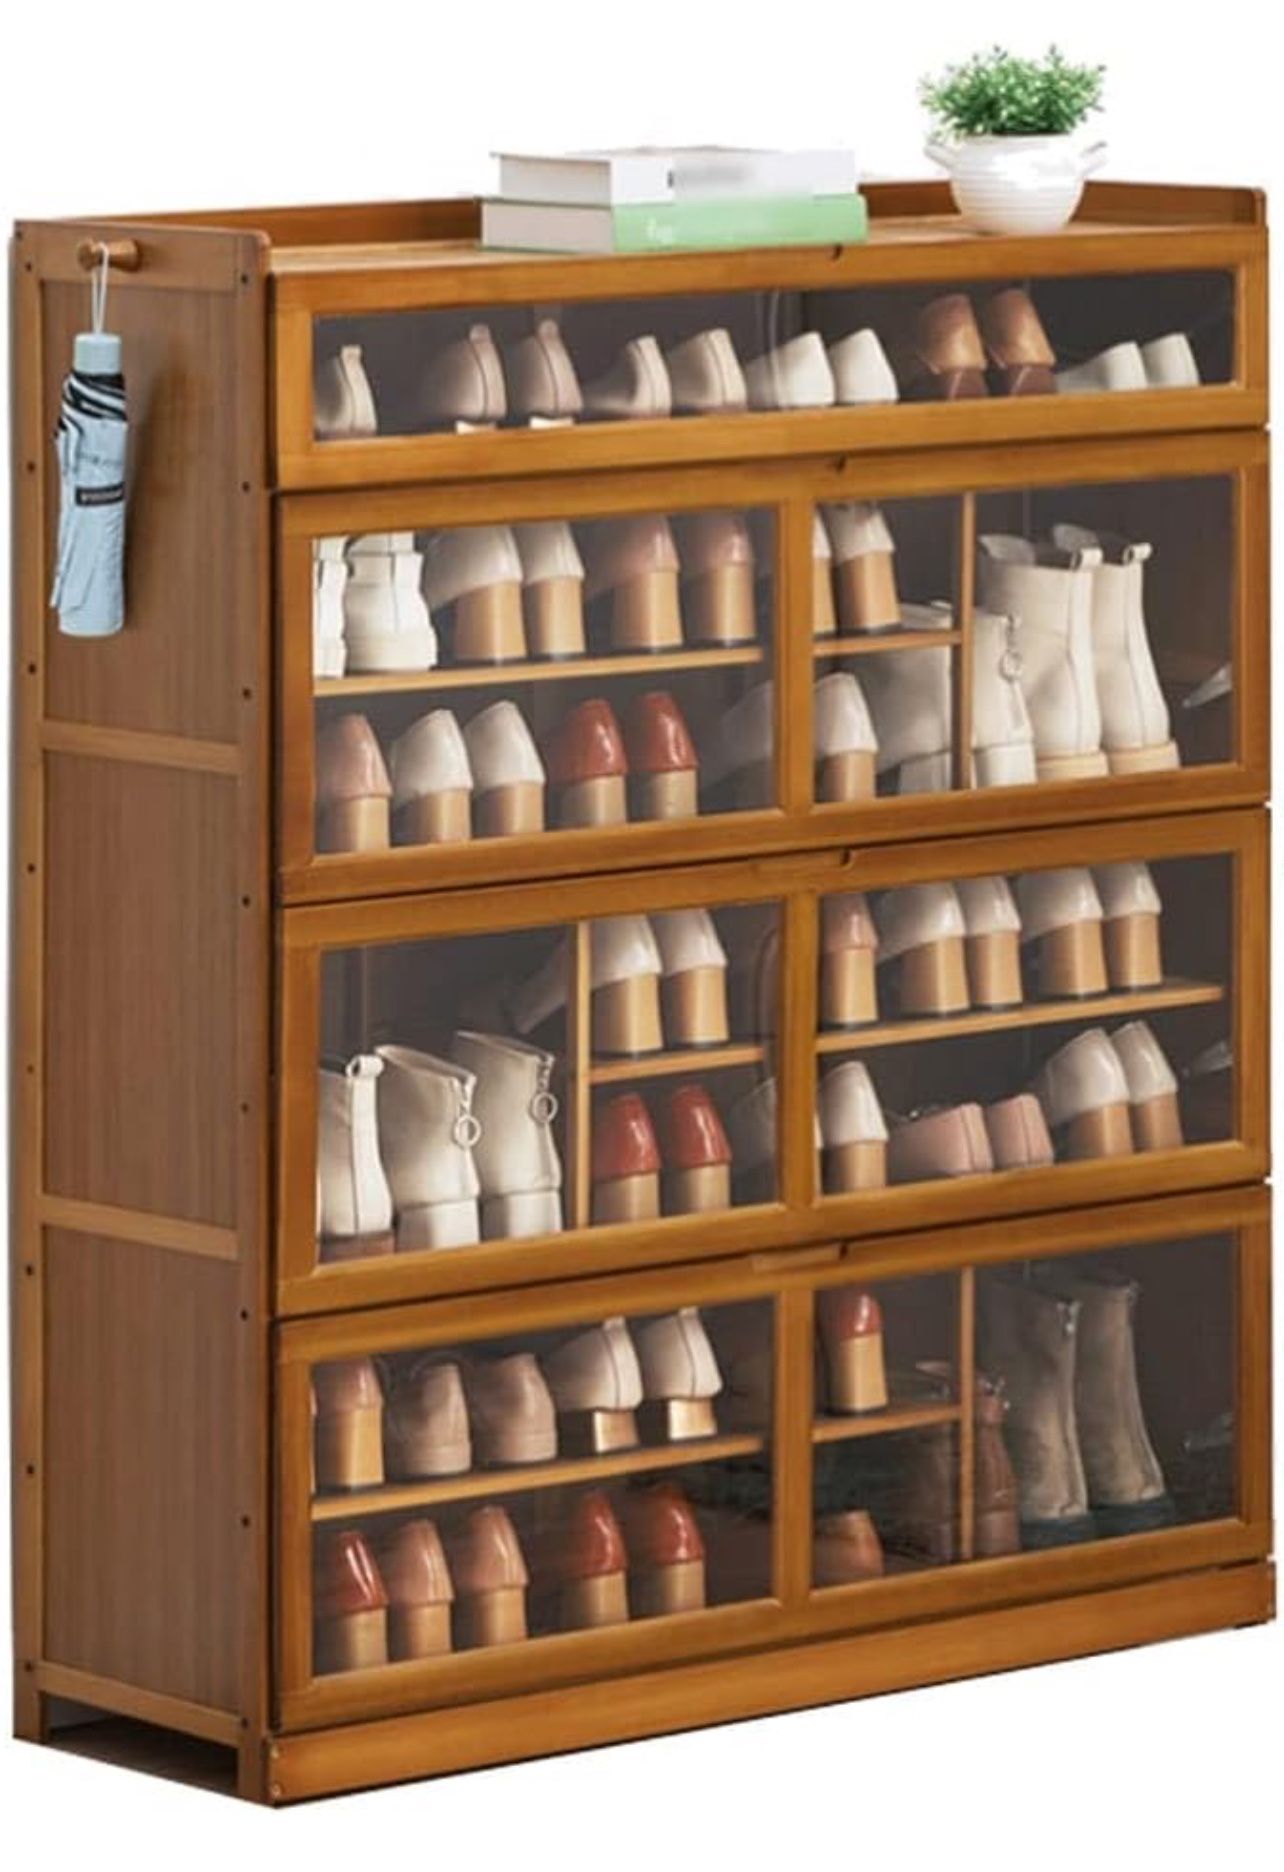 Shoe Rack for entryway Shoe Rack Wooden Shoe Storage Cabinet 7 Tier Shoe Racks for Entryway Holds 17-35 Pairs Shoe and Boots Shelf Organizer,3 Size Sh